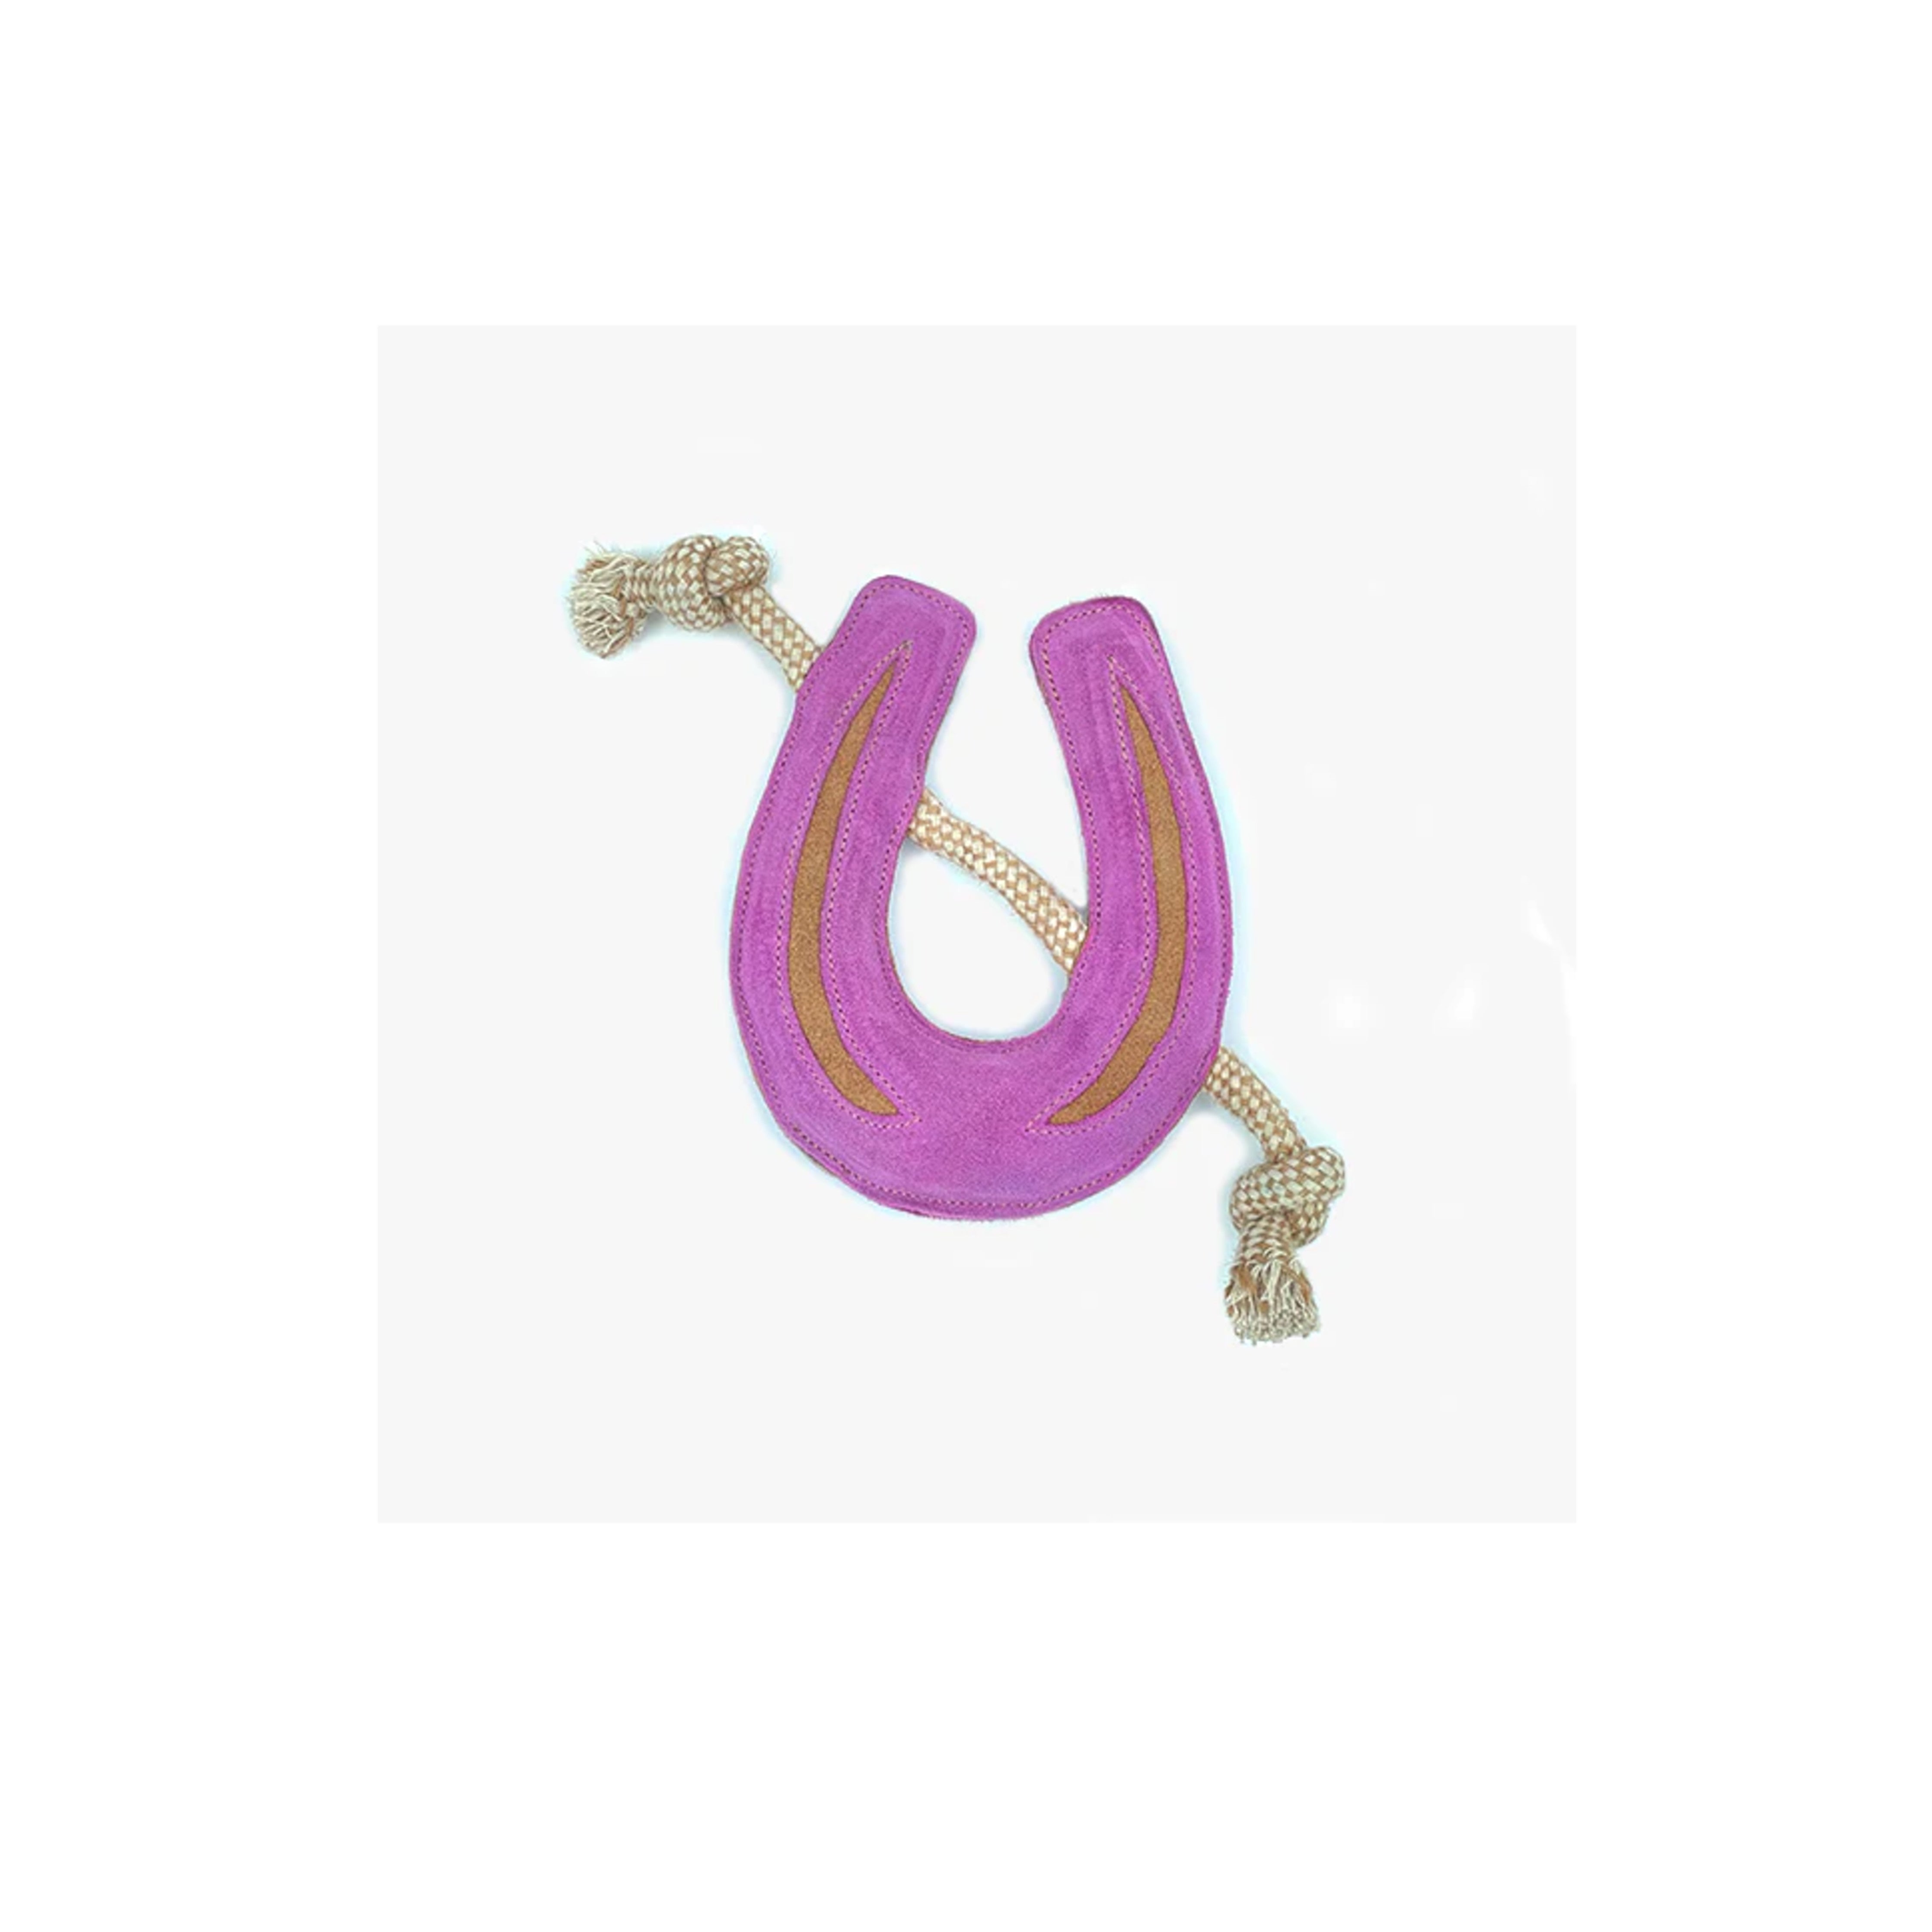 Get the Gallop Suede Dog Toy